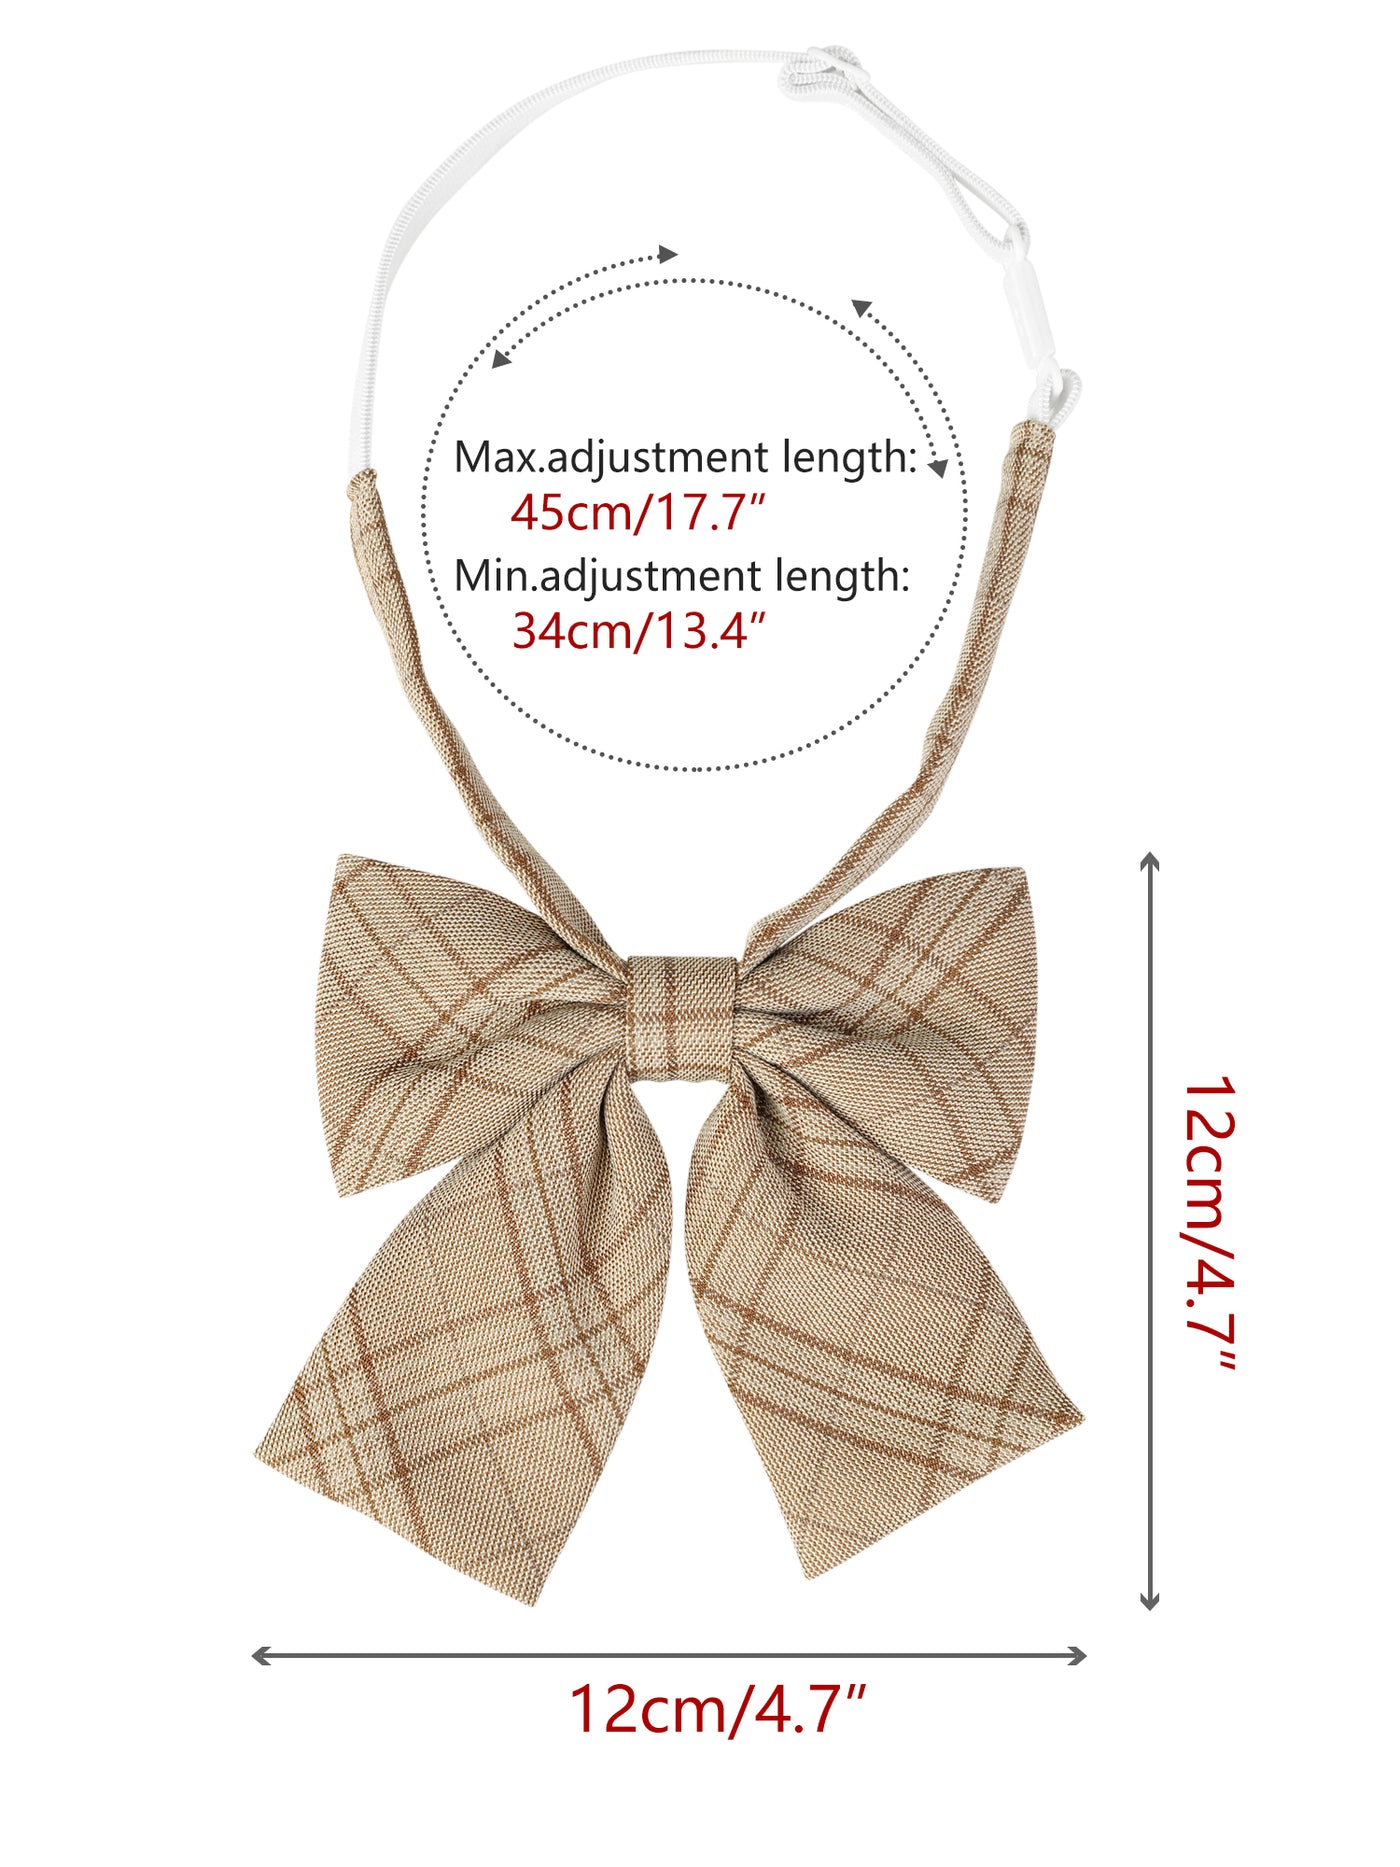 Bublédon Women's Bow Ties Plaid Cotton Pre-tied Funny Bowties for Party Costume